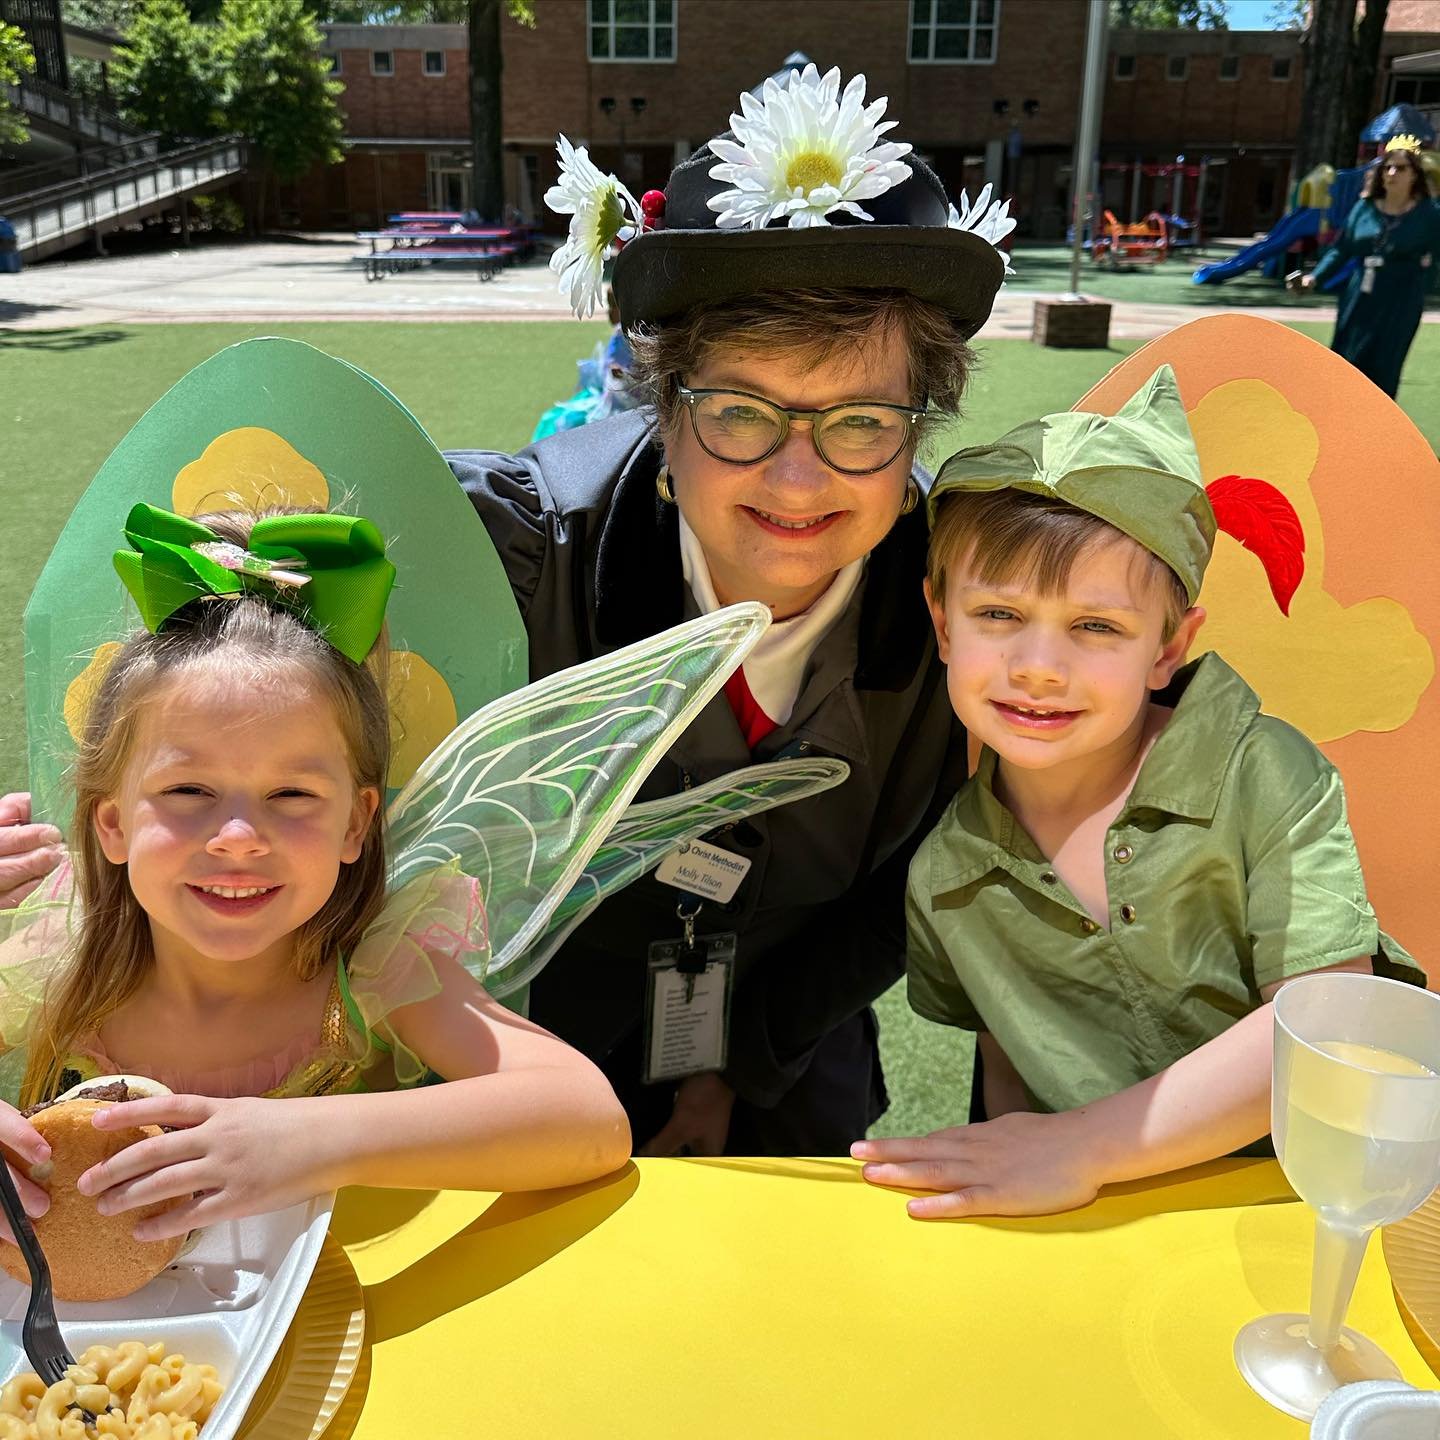 A magical day in PK! ✨ We wrapped up our fairytale unit with an enchanting fairytale feast. Students dressed up as fairytale characters and it was a scene straight from a storybook! 📚 They had a parade through the school and and feast fit for royalt